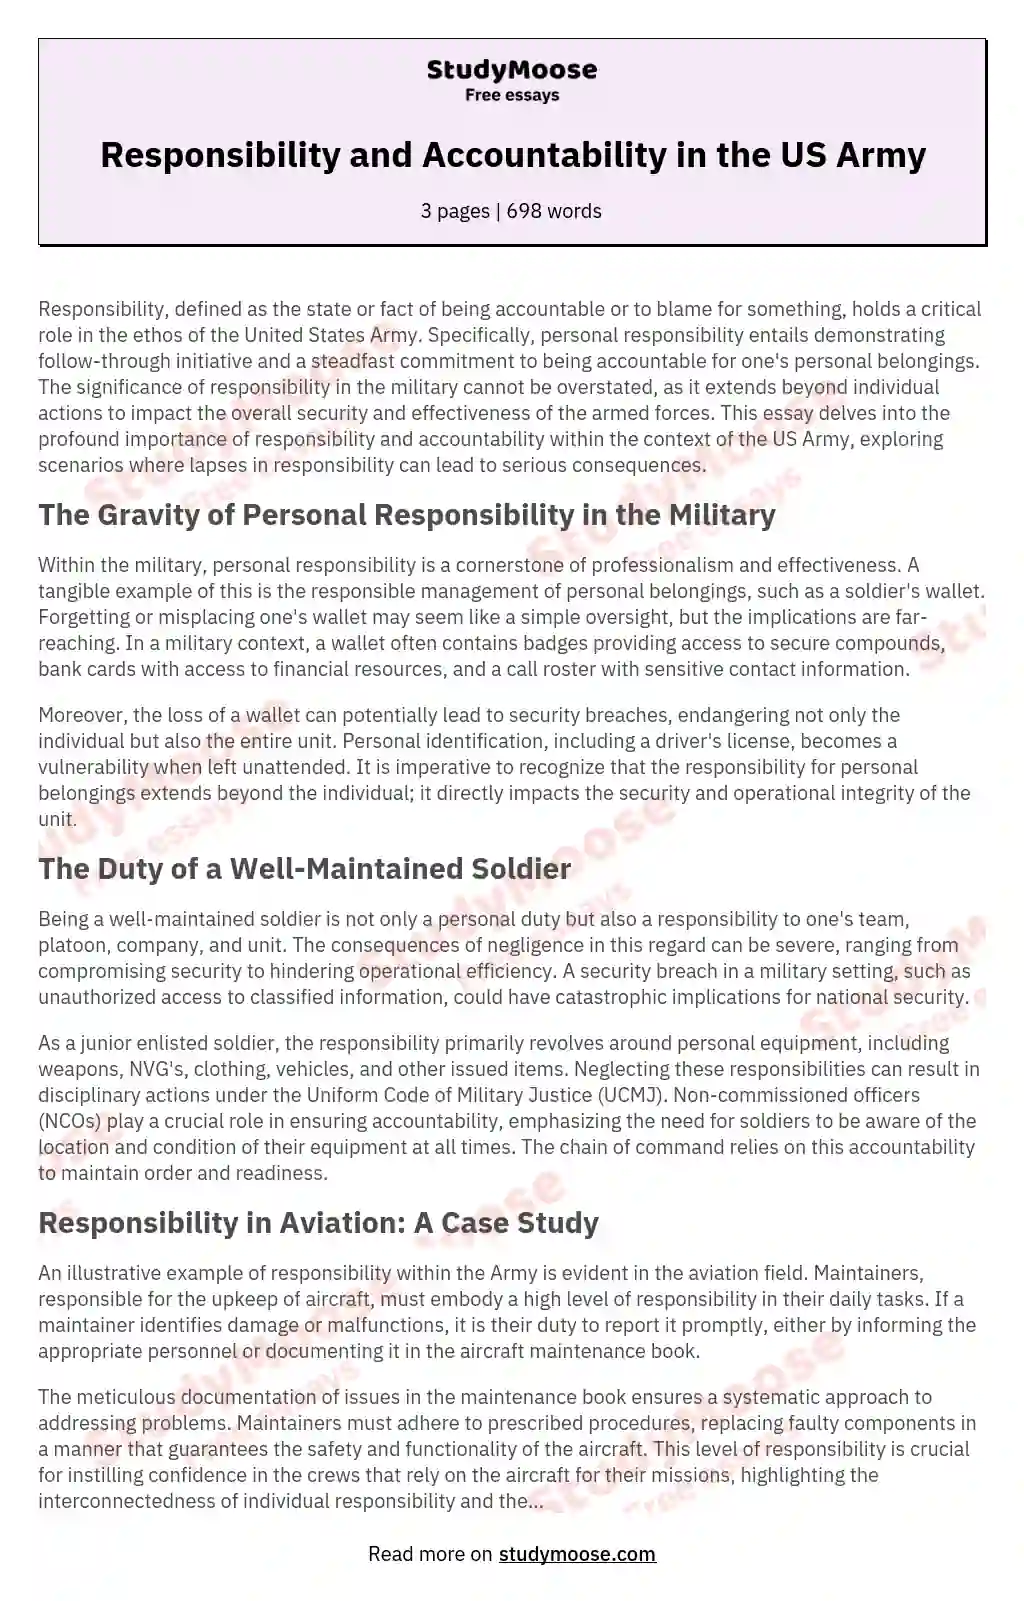 Responsibility and Accountability in the US Army essay